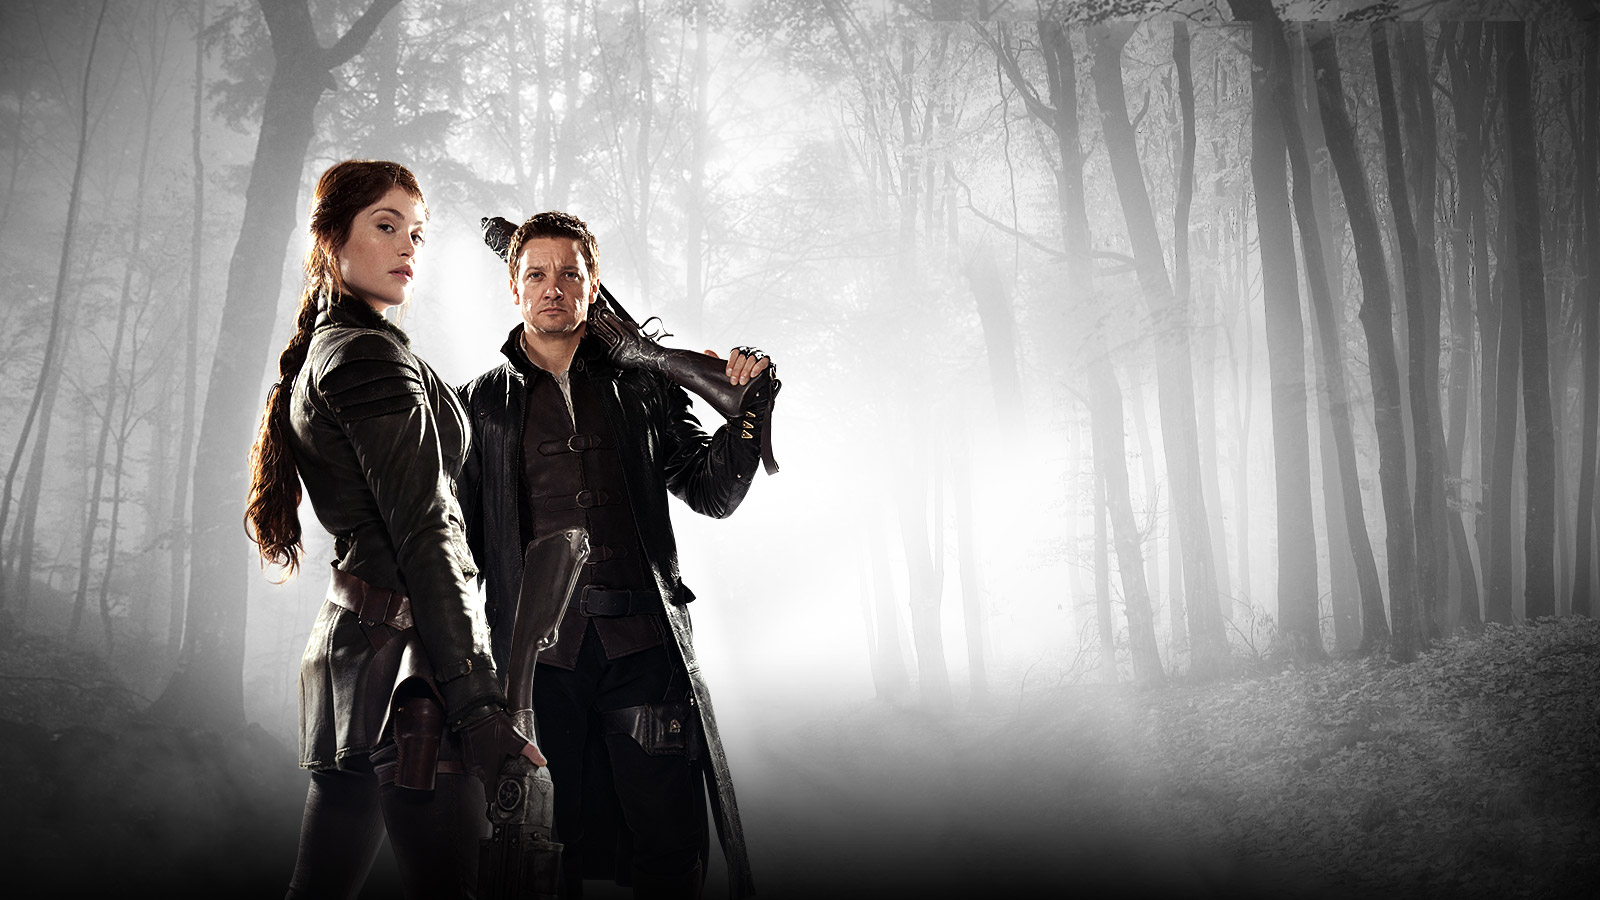 Hansel & Gretel: Witch Hunters Pics, Movie Collection